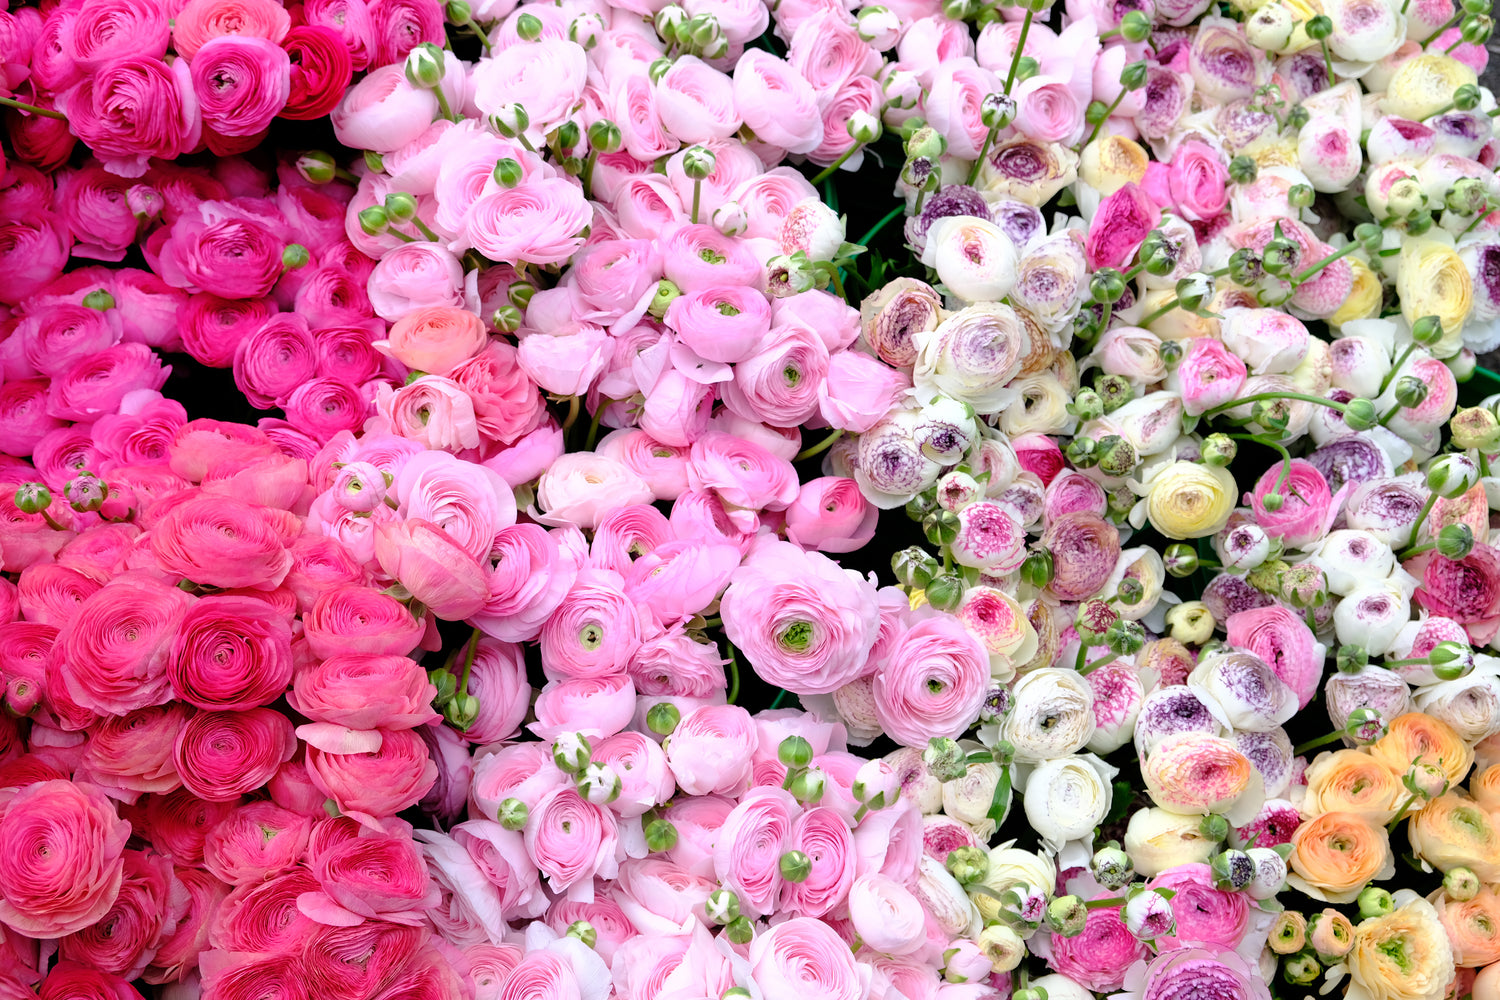 How To Grow Ranunculus and Anemones